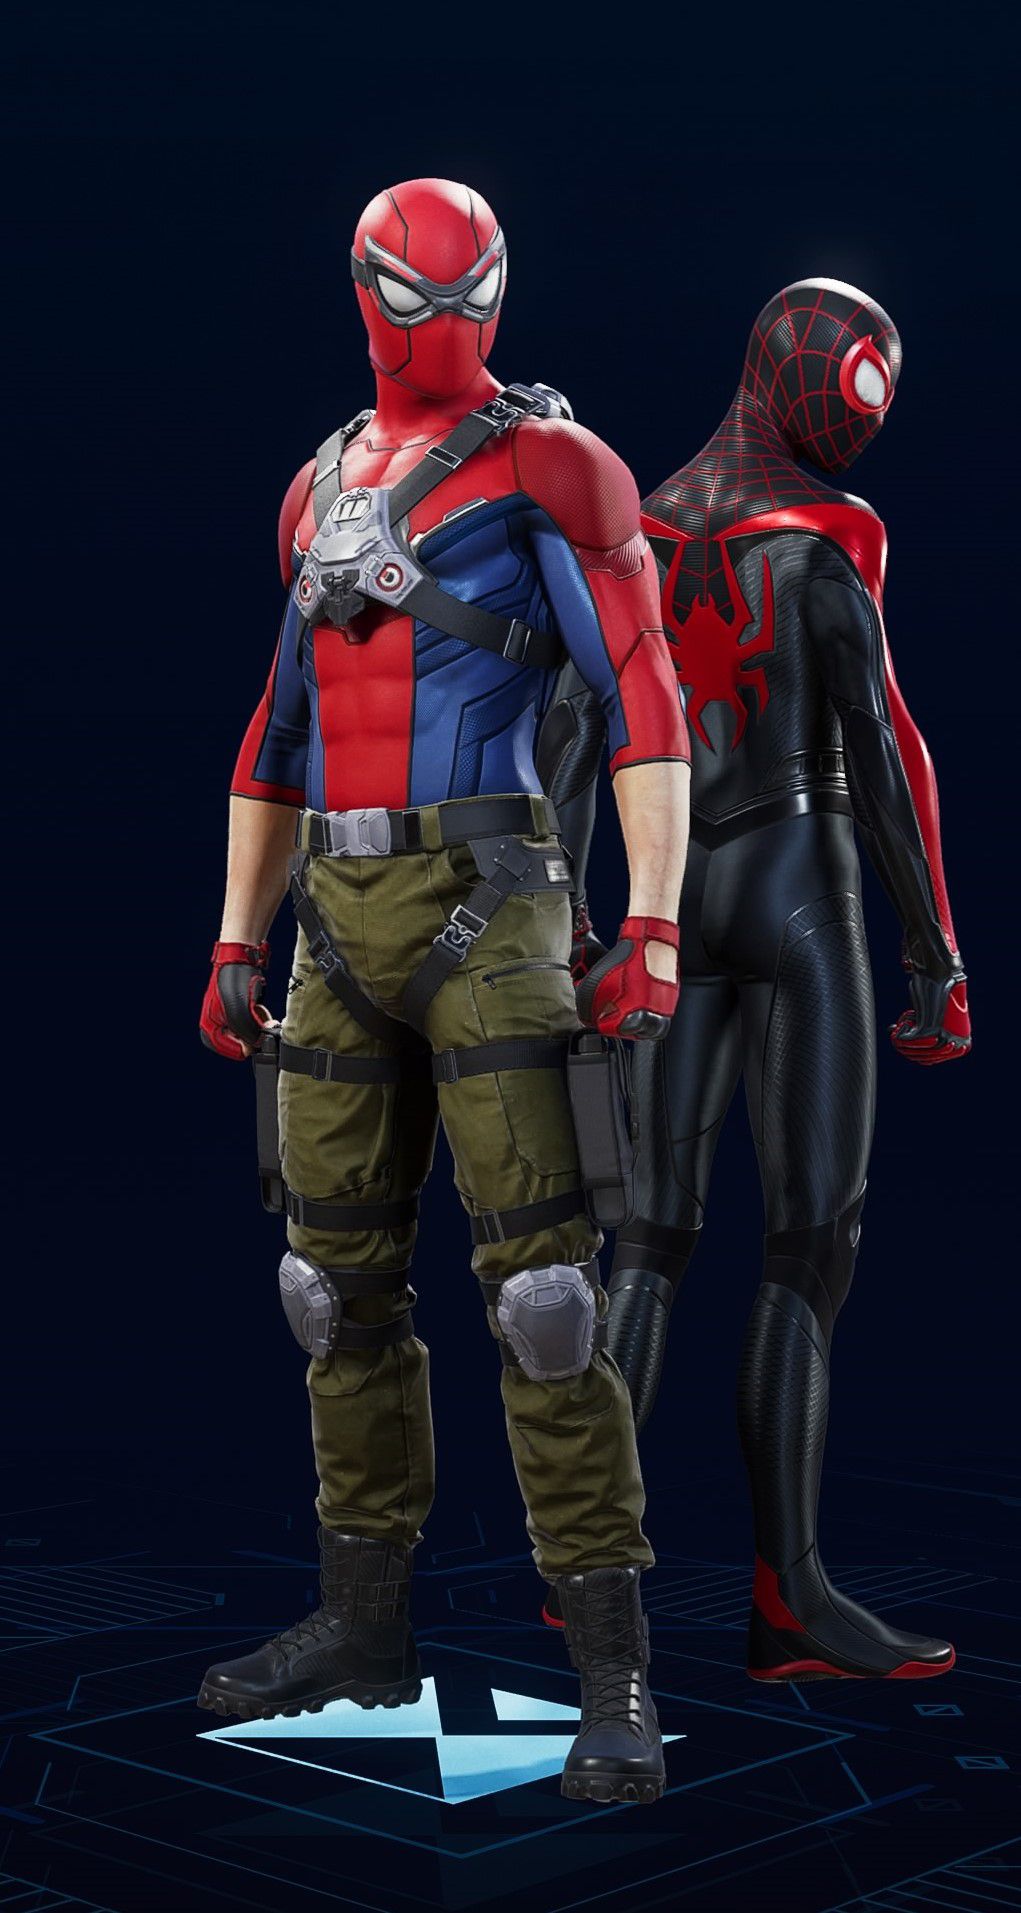 Peter Parker stands in his Secret Wars Civil War Suit in the suit selection screen of Spider-Man 2.